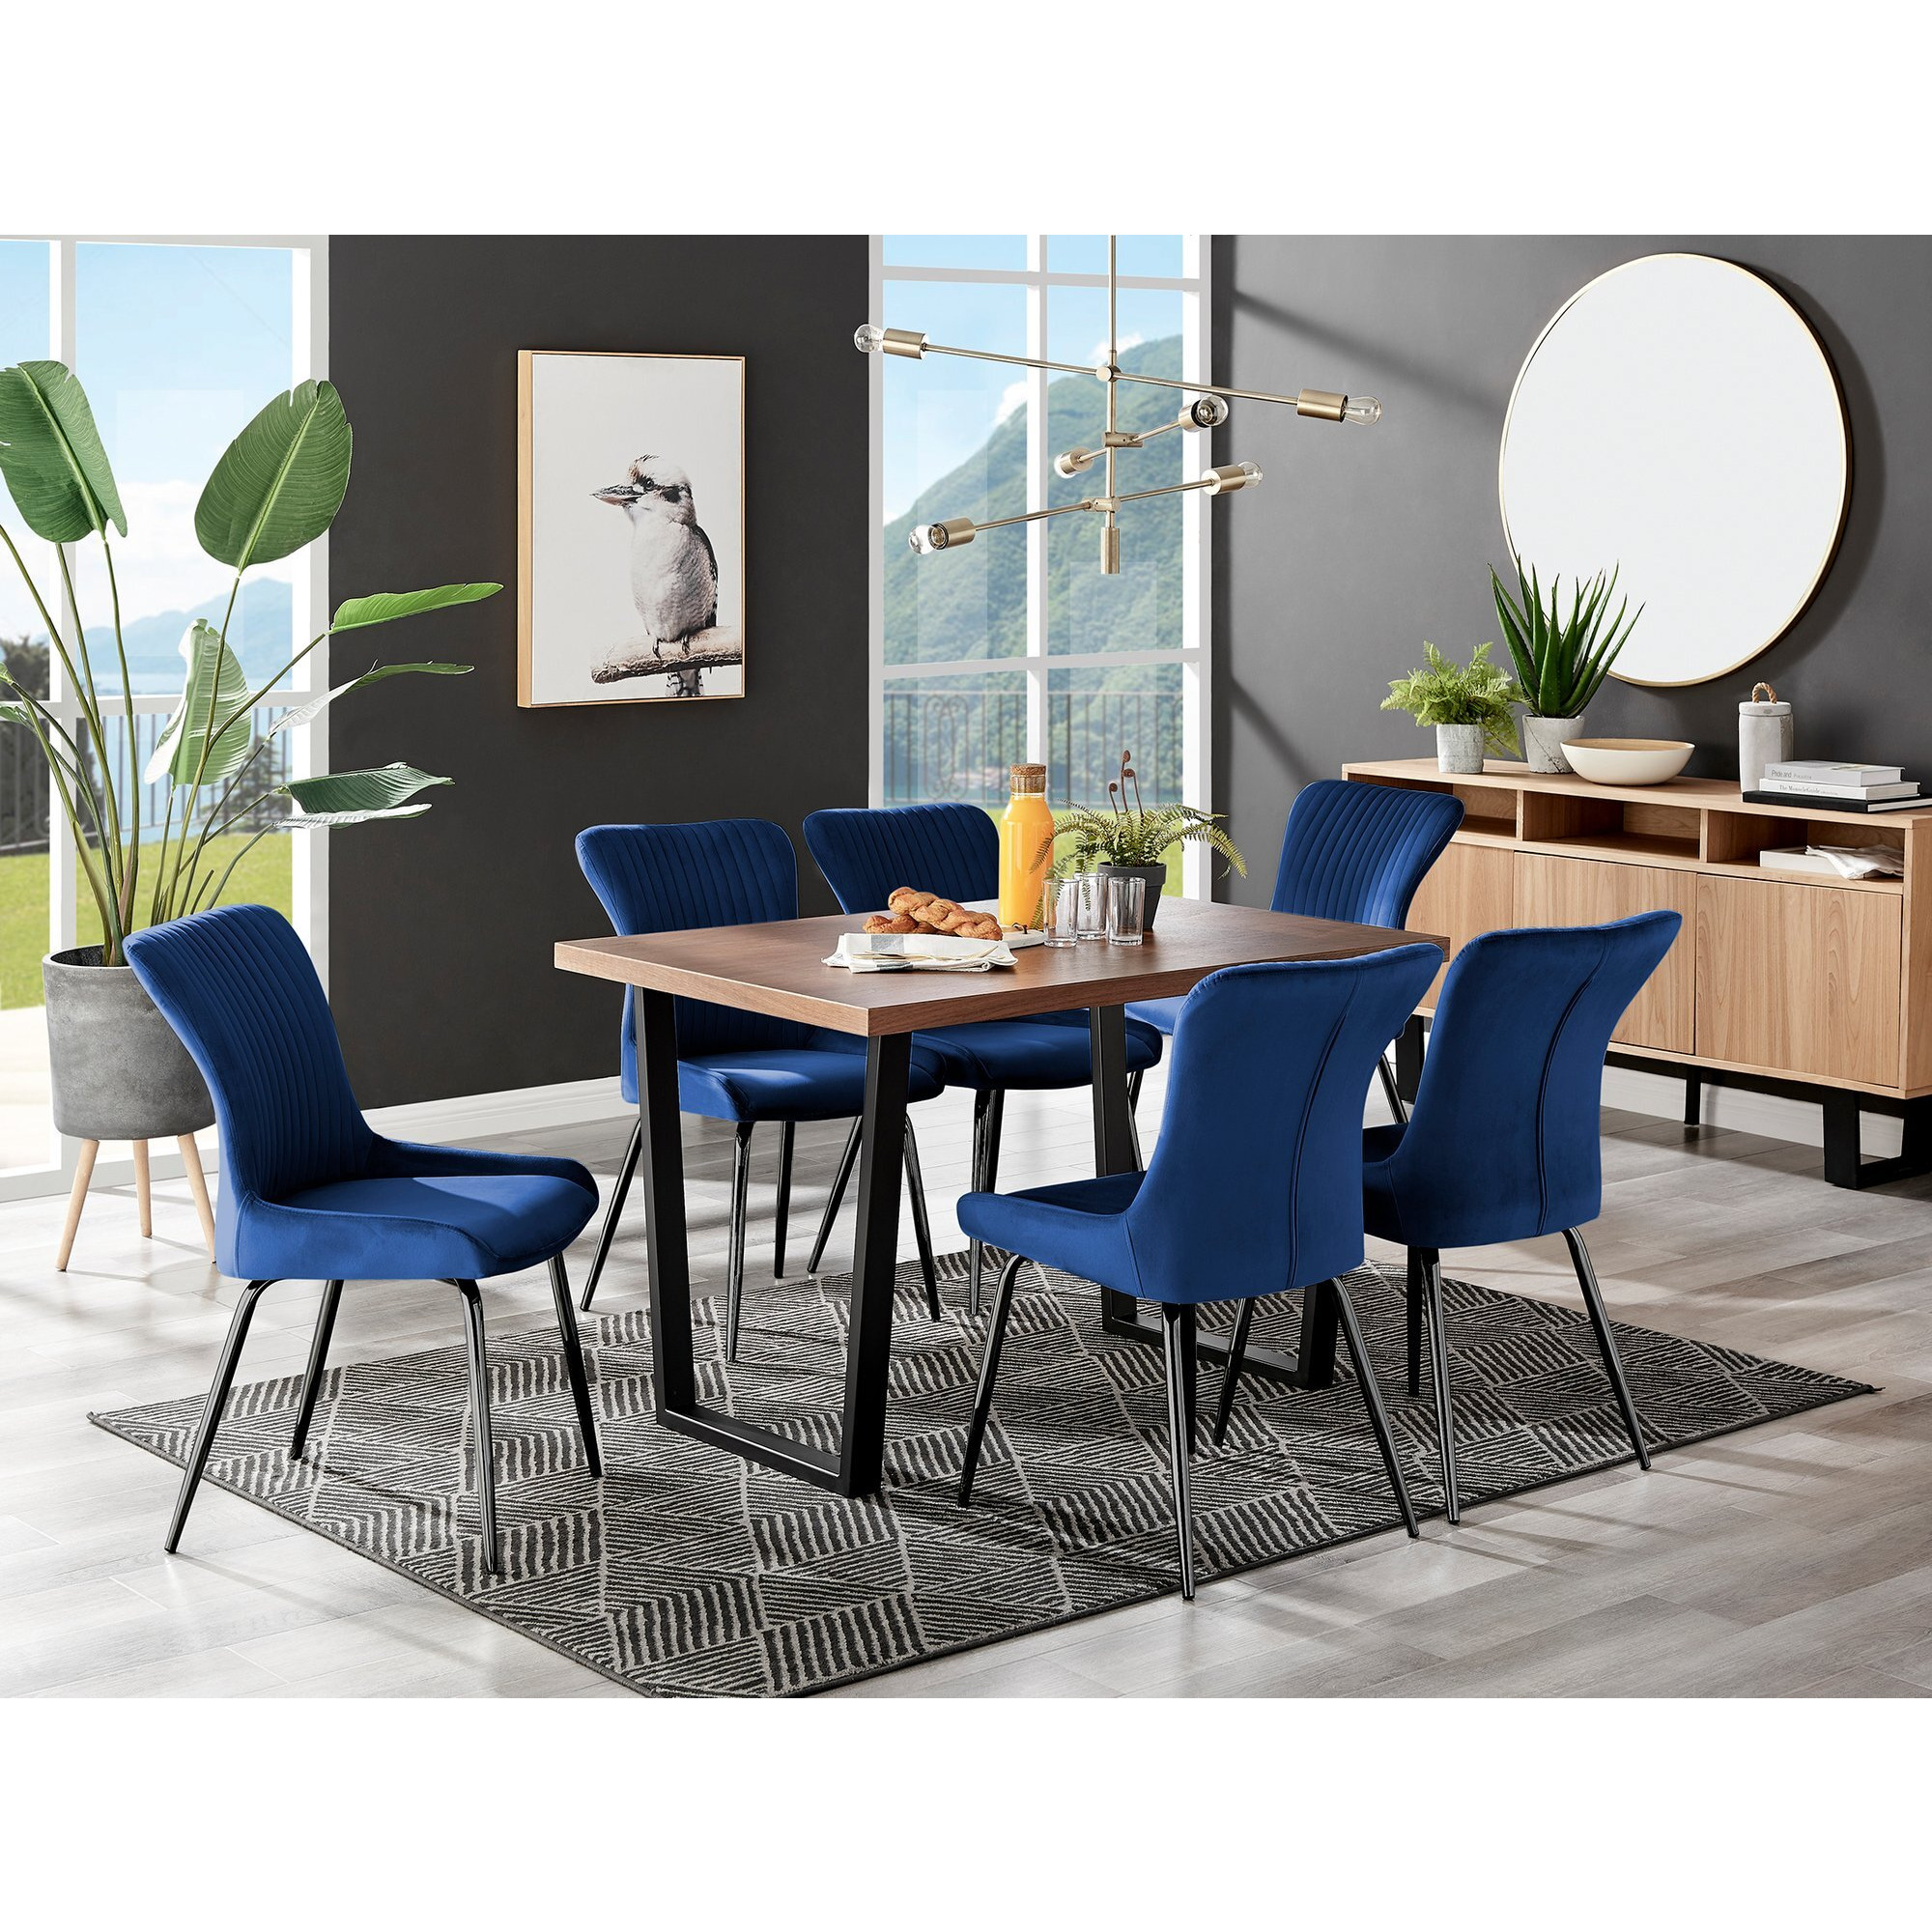 Kylo Brown Wood Effect Dining Table & 6 Nora Black Leg Chairs